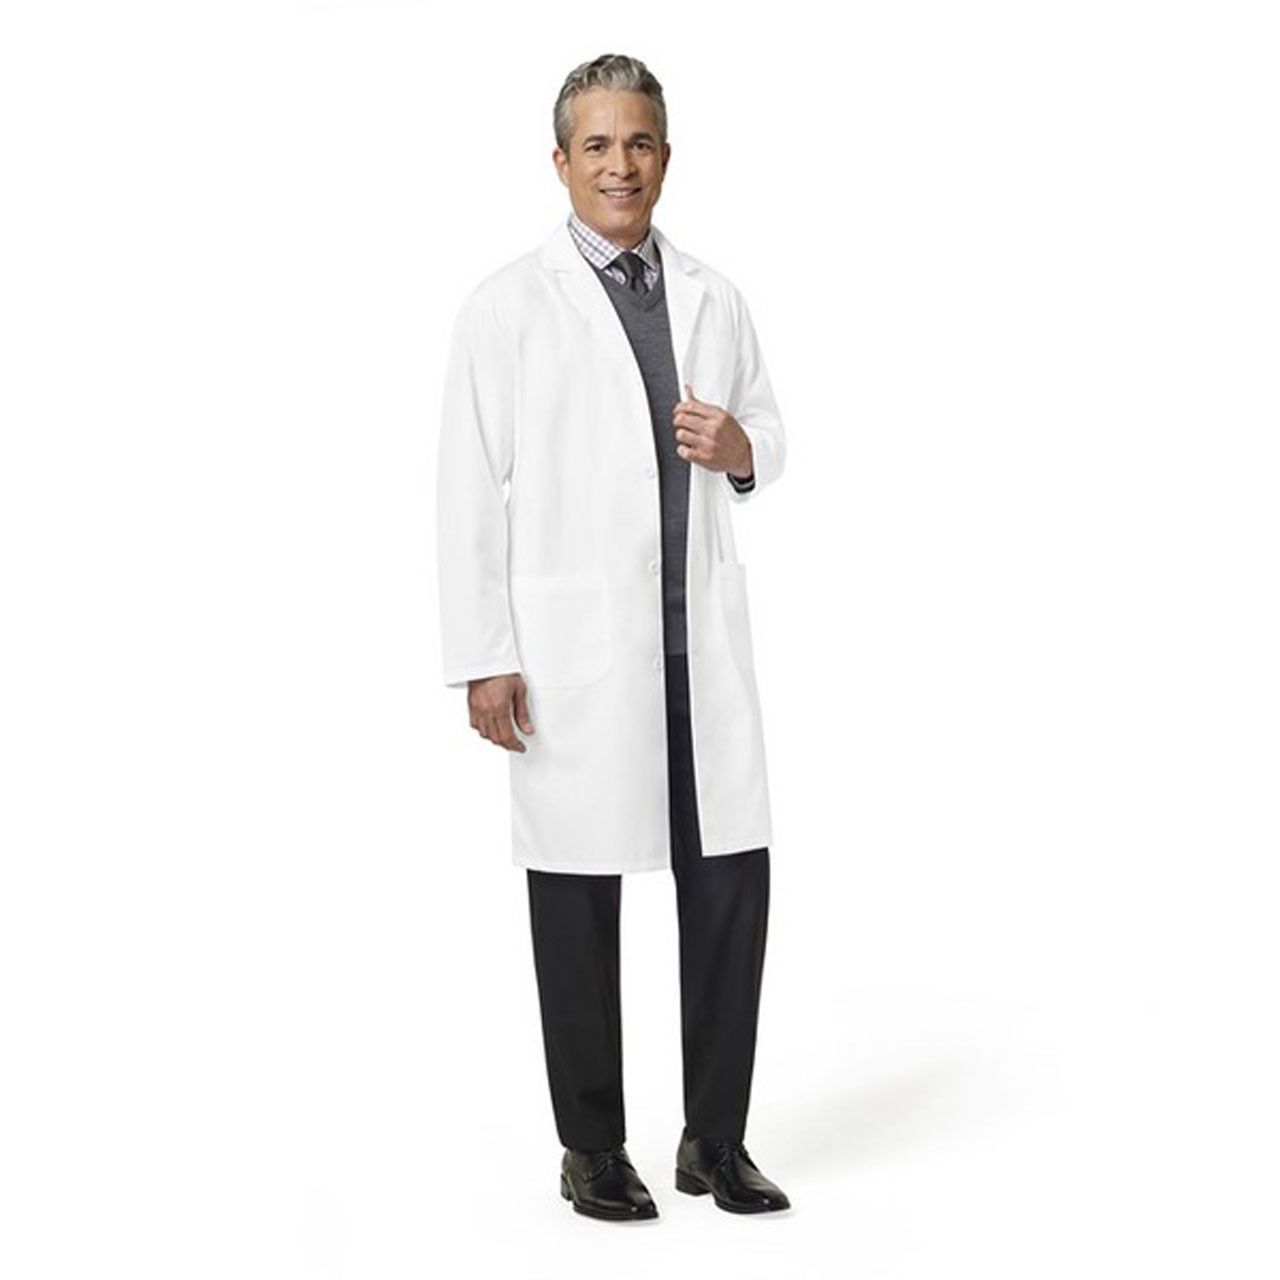 What are the key features of these jackets for men in bulk, specifically lab coats?